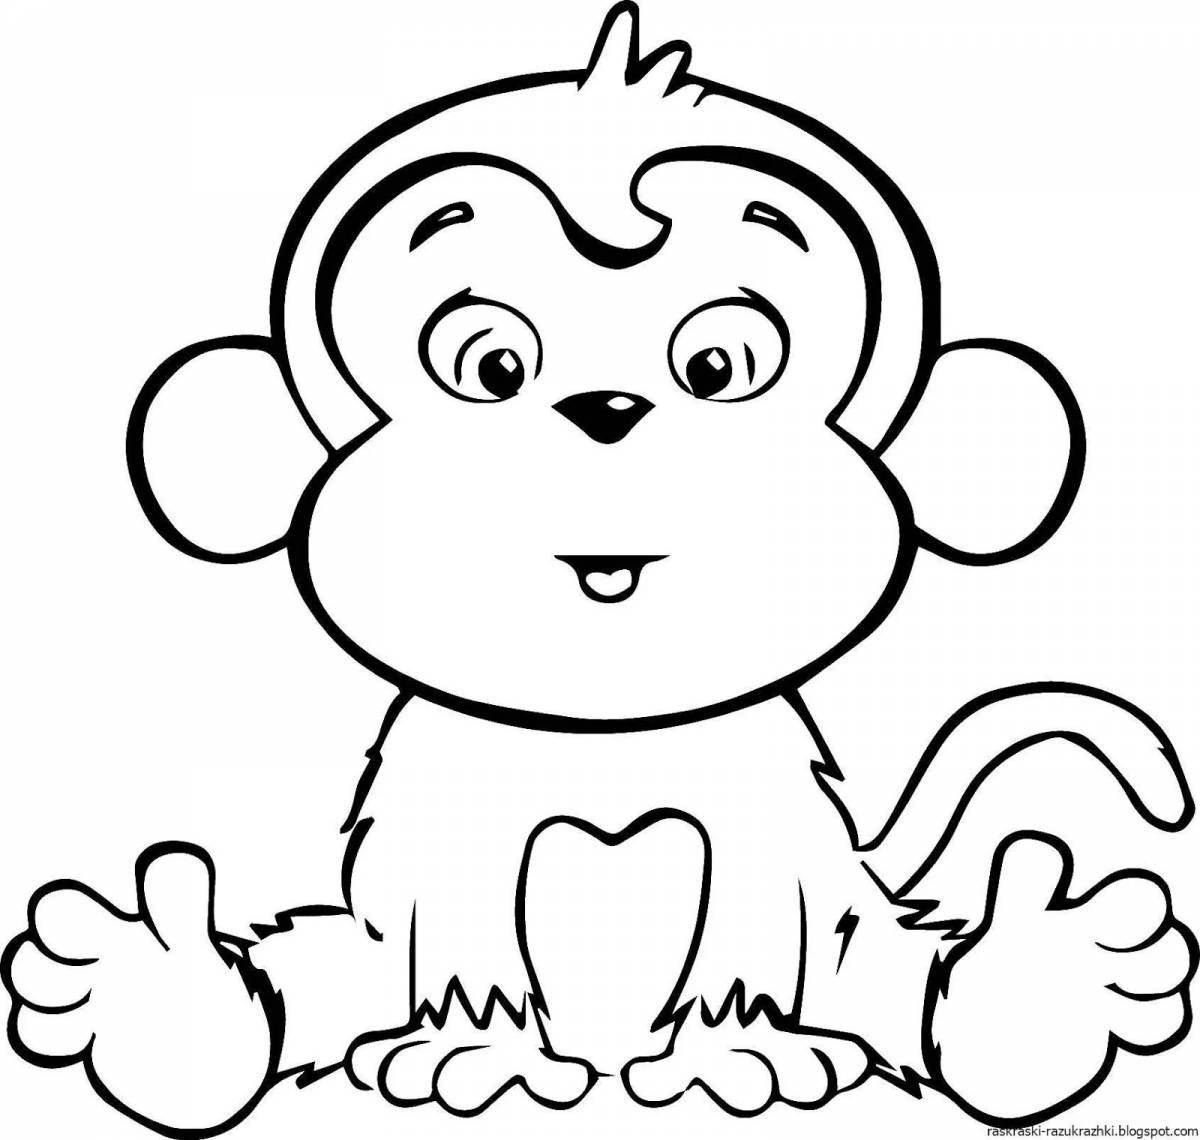 Cute animal coloring book for kids